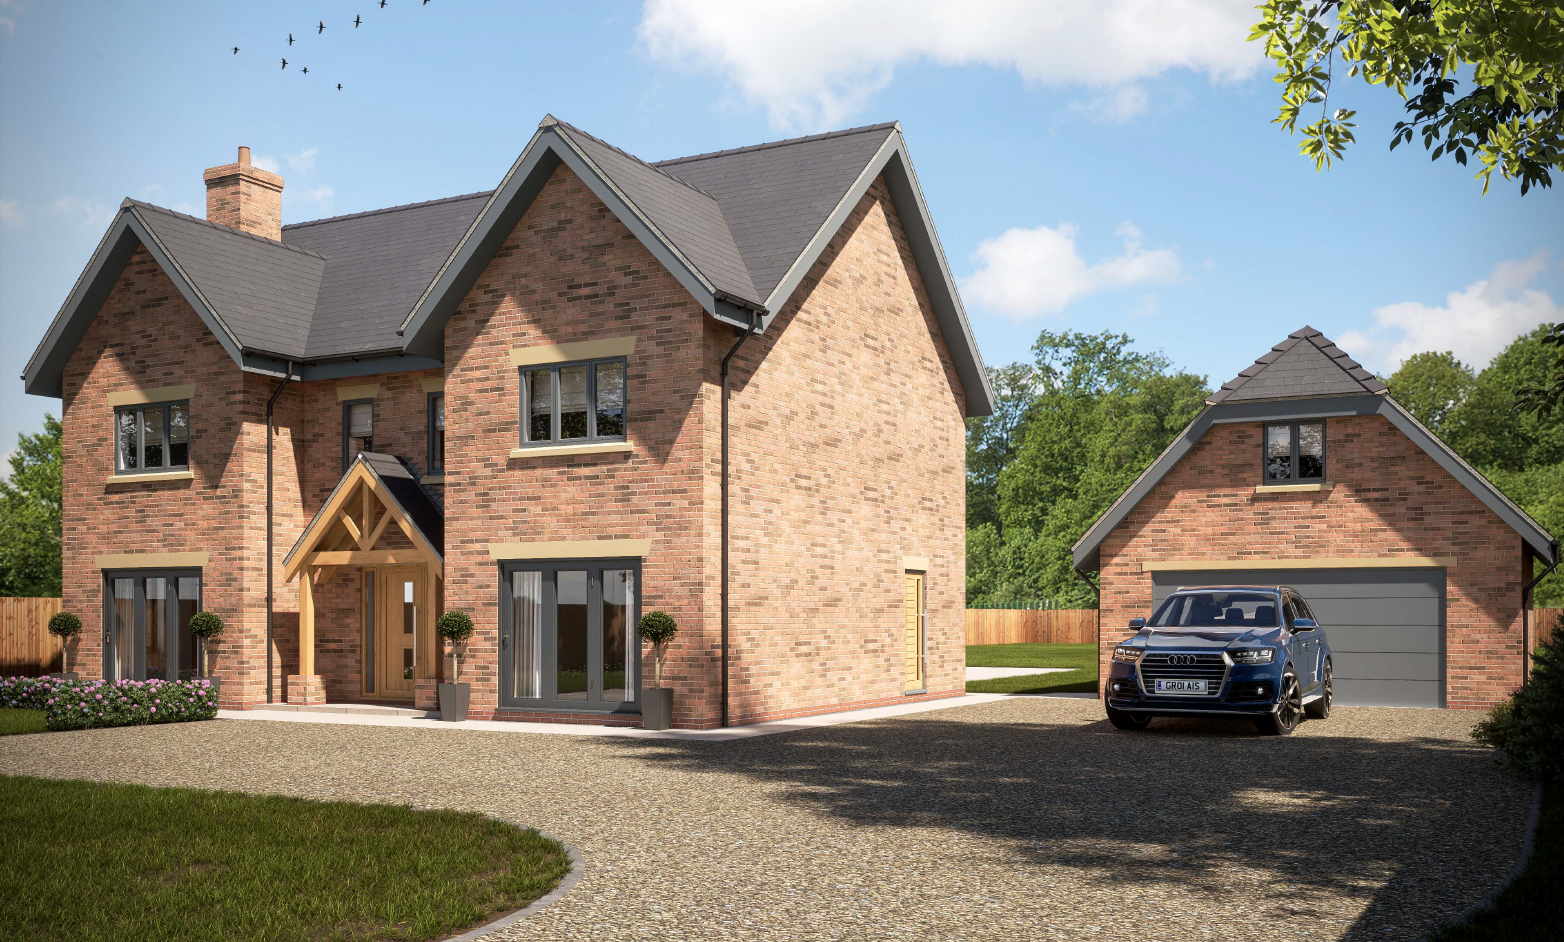 Full Planning Application Approved and Permission Granted for new self-build home in Sudbrooke, near Lincoln.  Image by Architectural Imaging Solutions. 